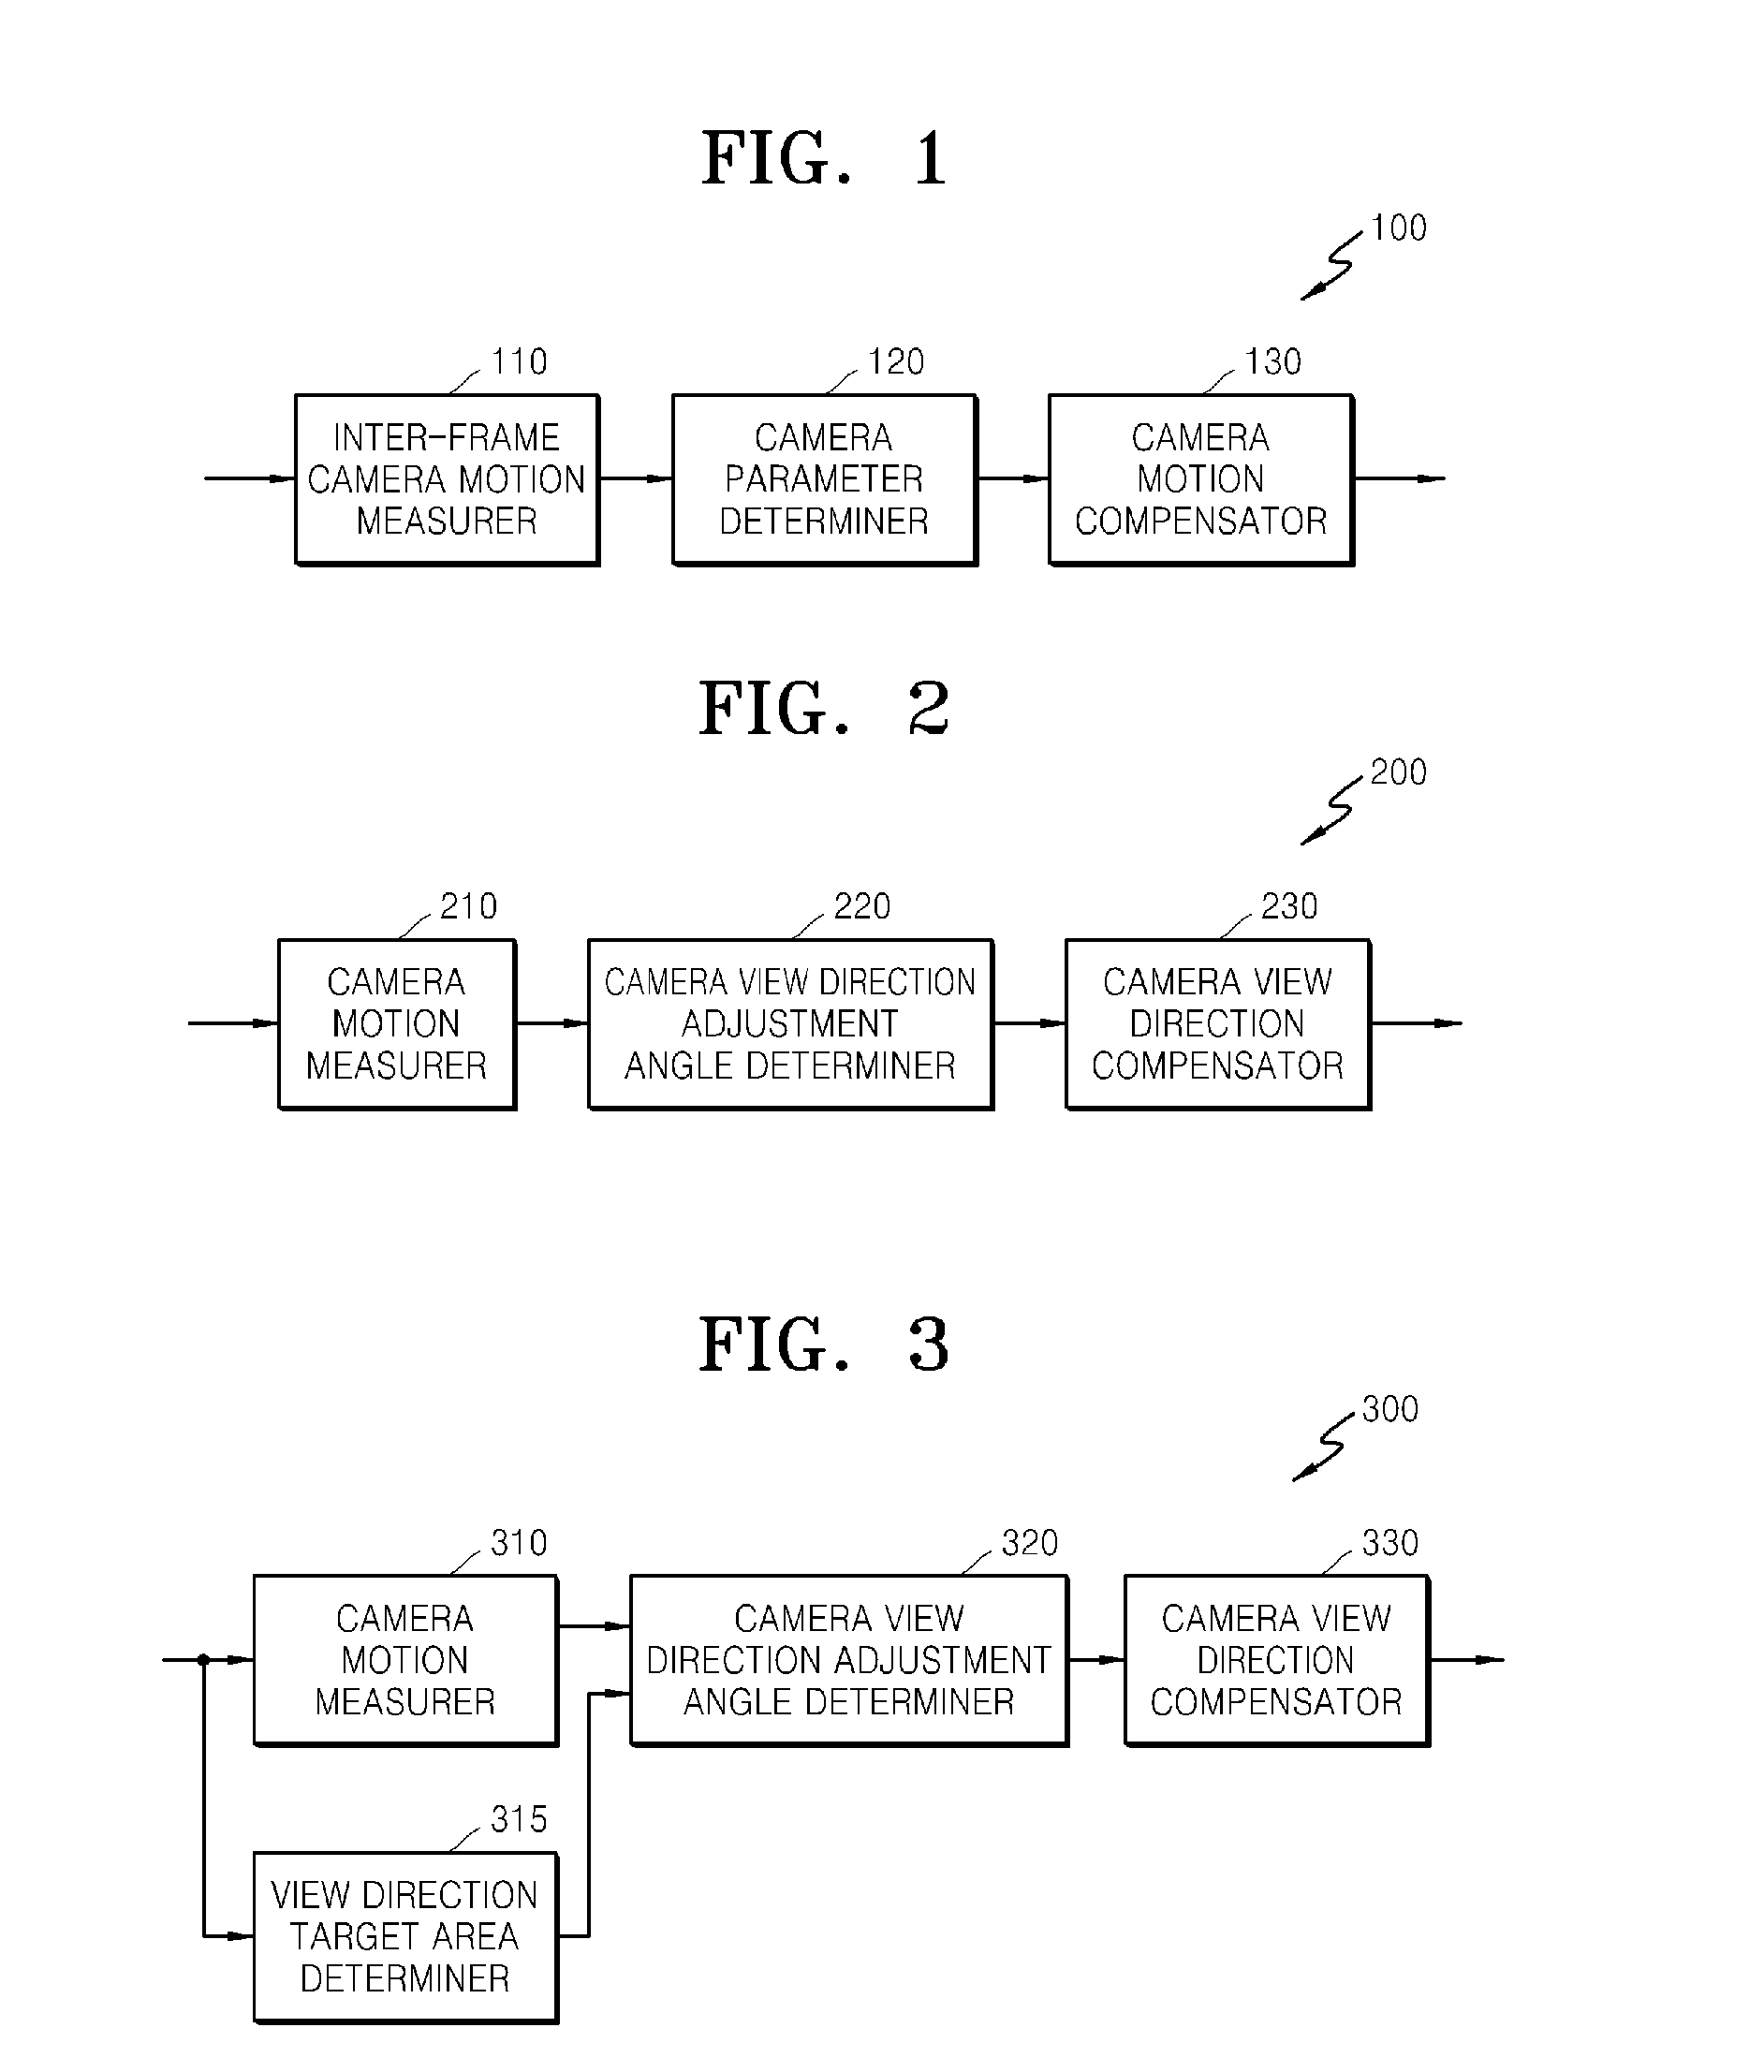 Method and apparatus for video stabilization by compensating for view direction of camera